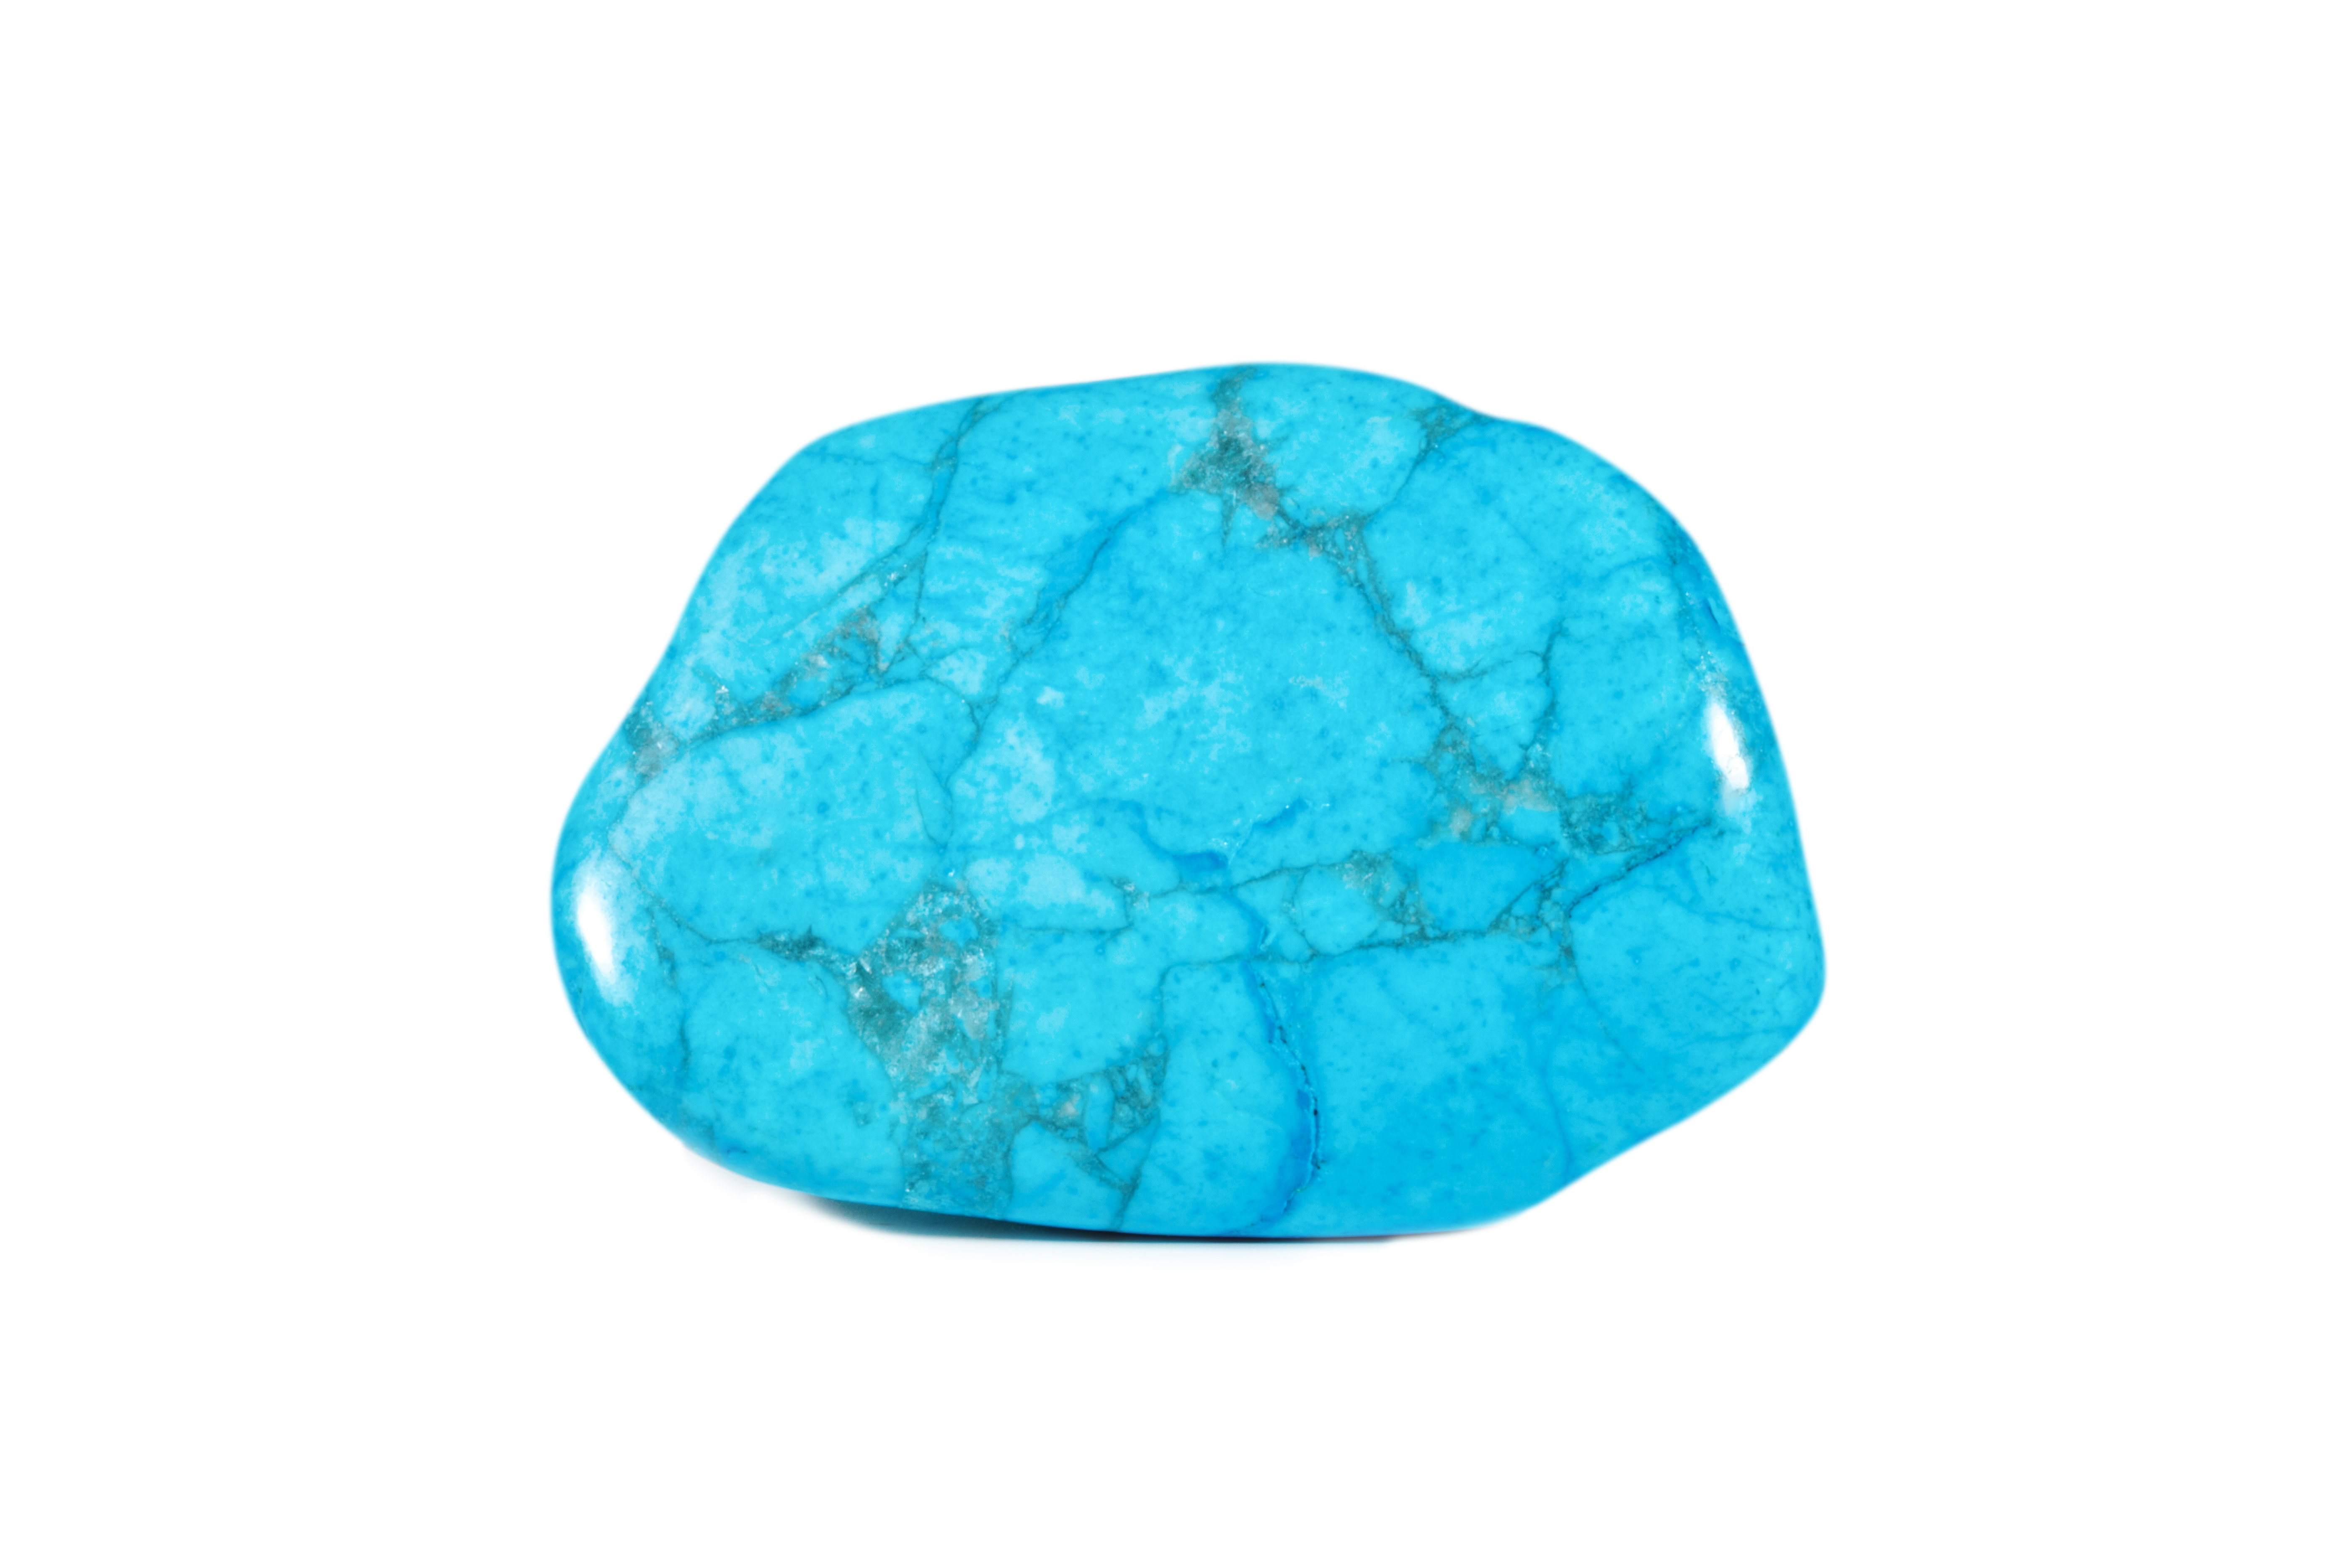 An image of turquoise